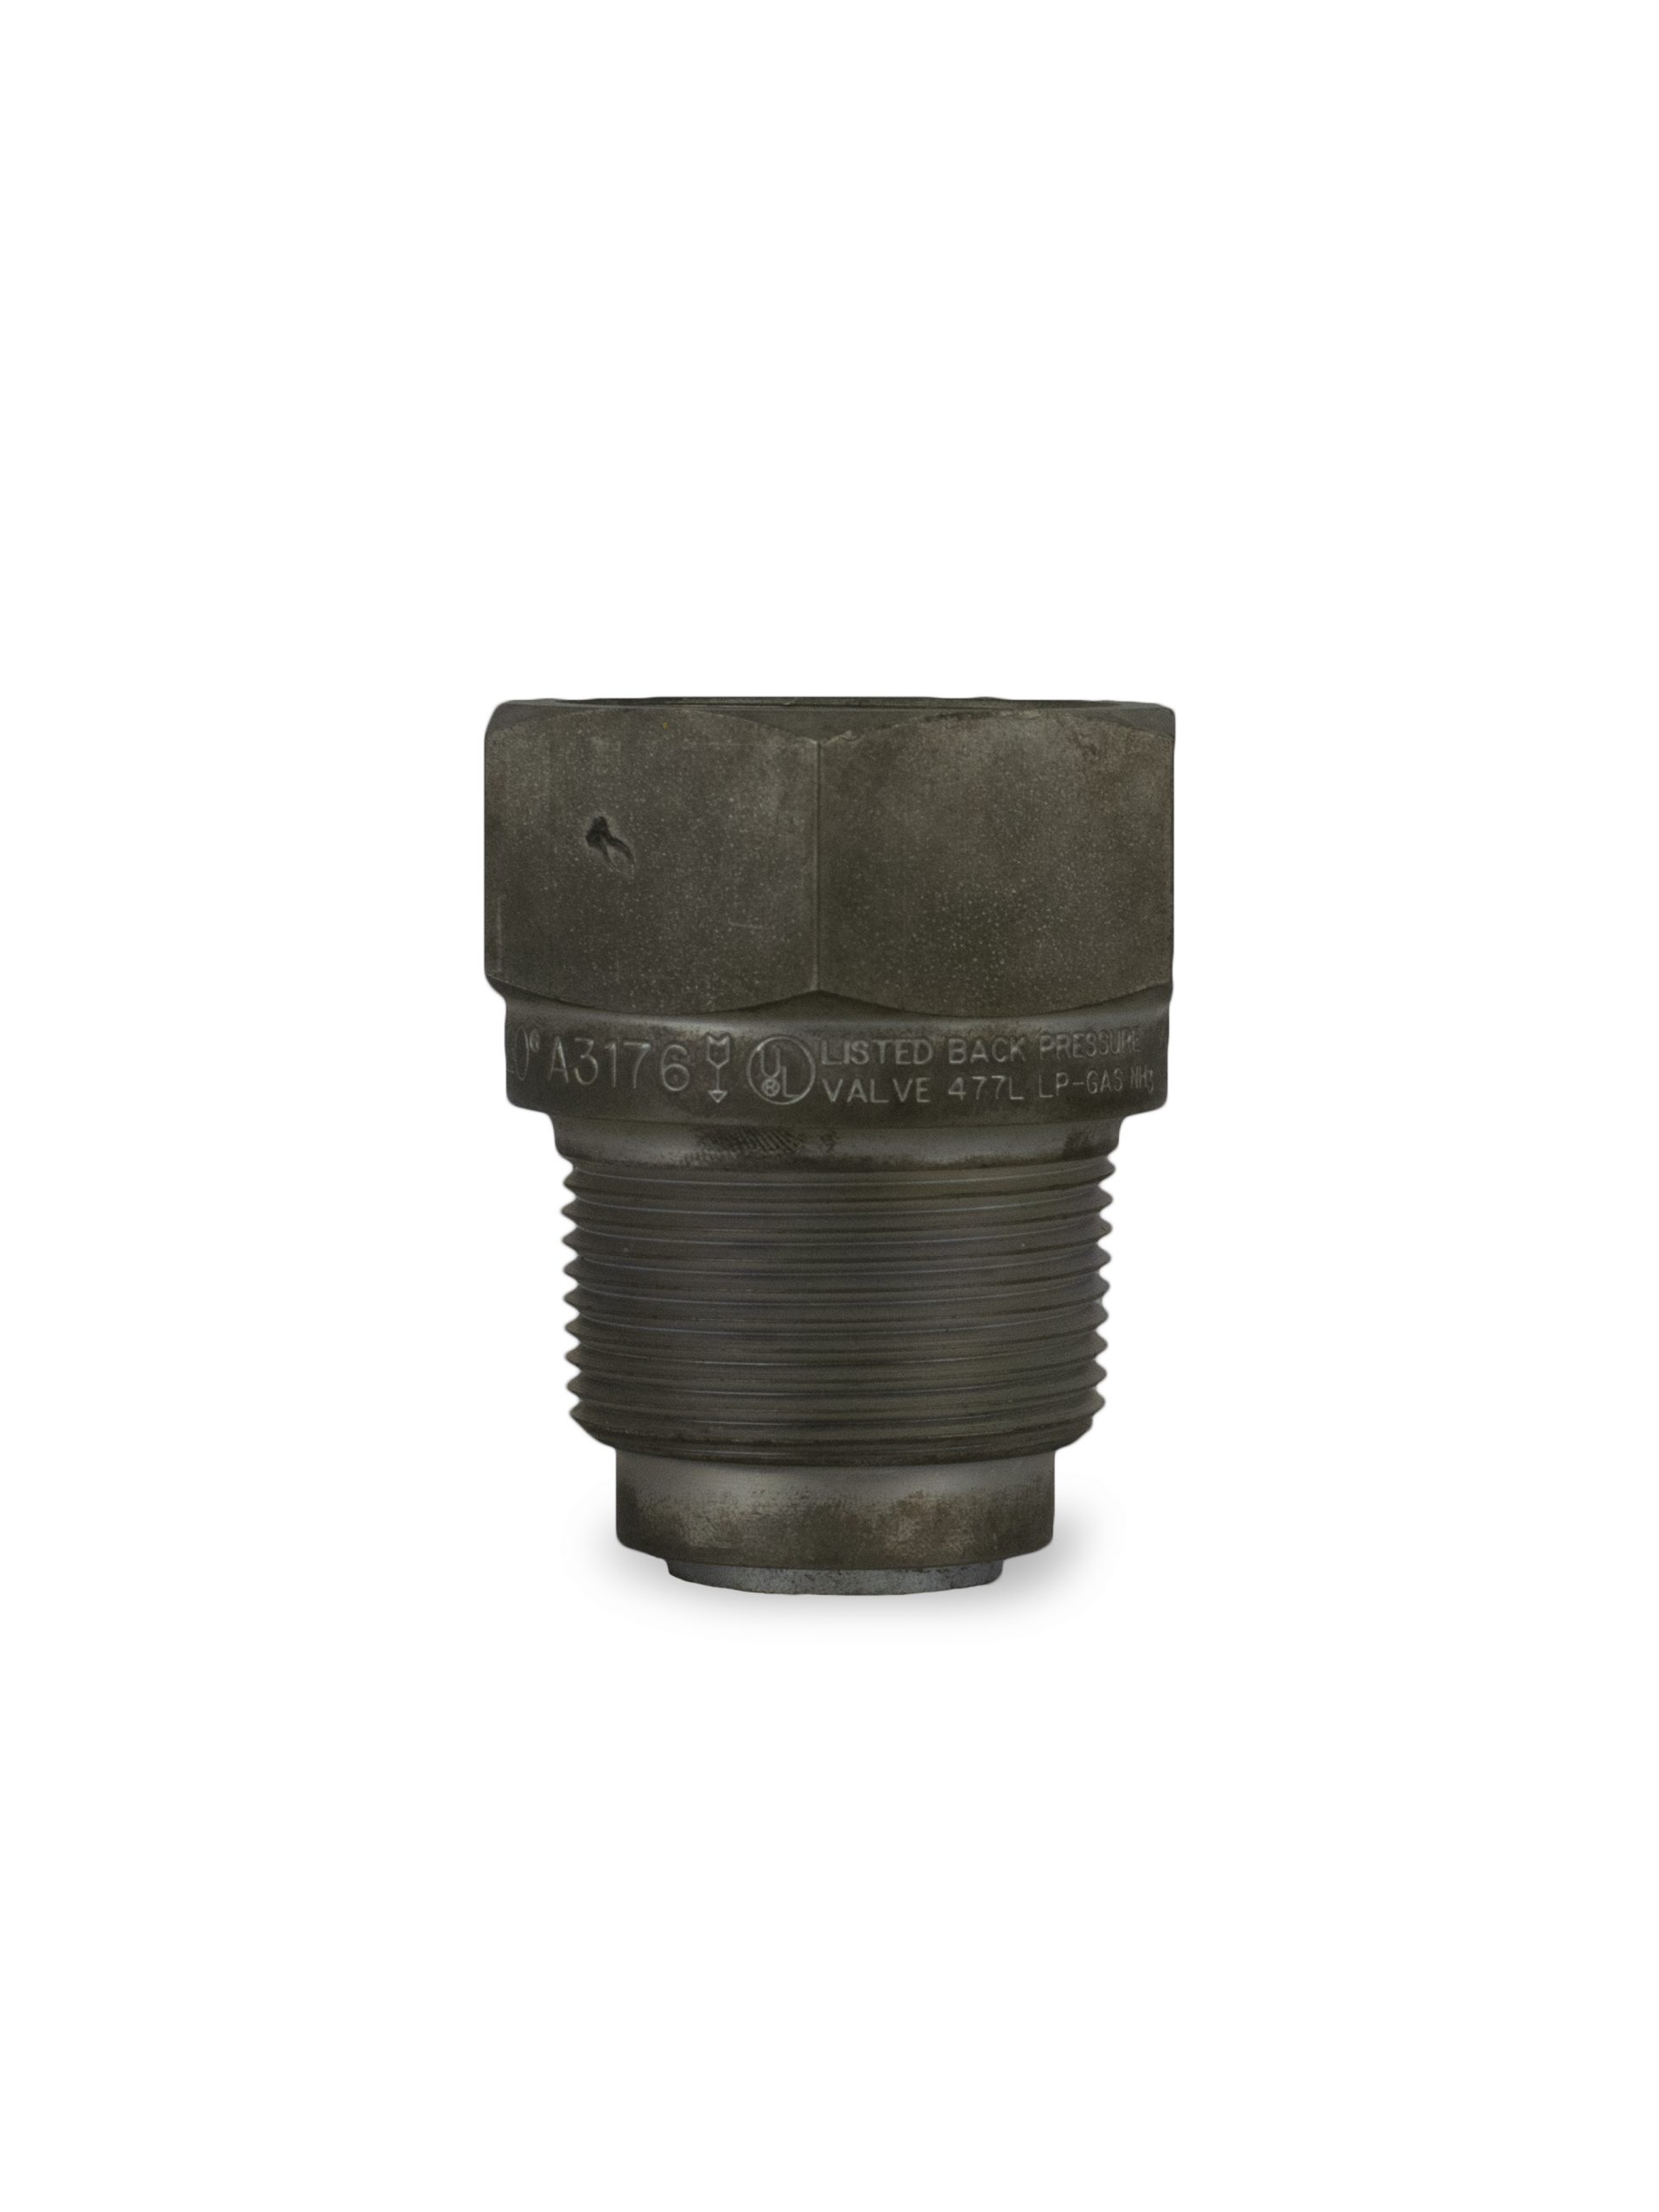 STAINLESS STEEL BACK CHECK VALVE 1 1/4 Inches from Gas Equipment Company Llc Abu Dhabi, UNITED ARAB EMIRATES